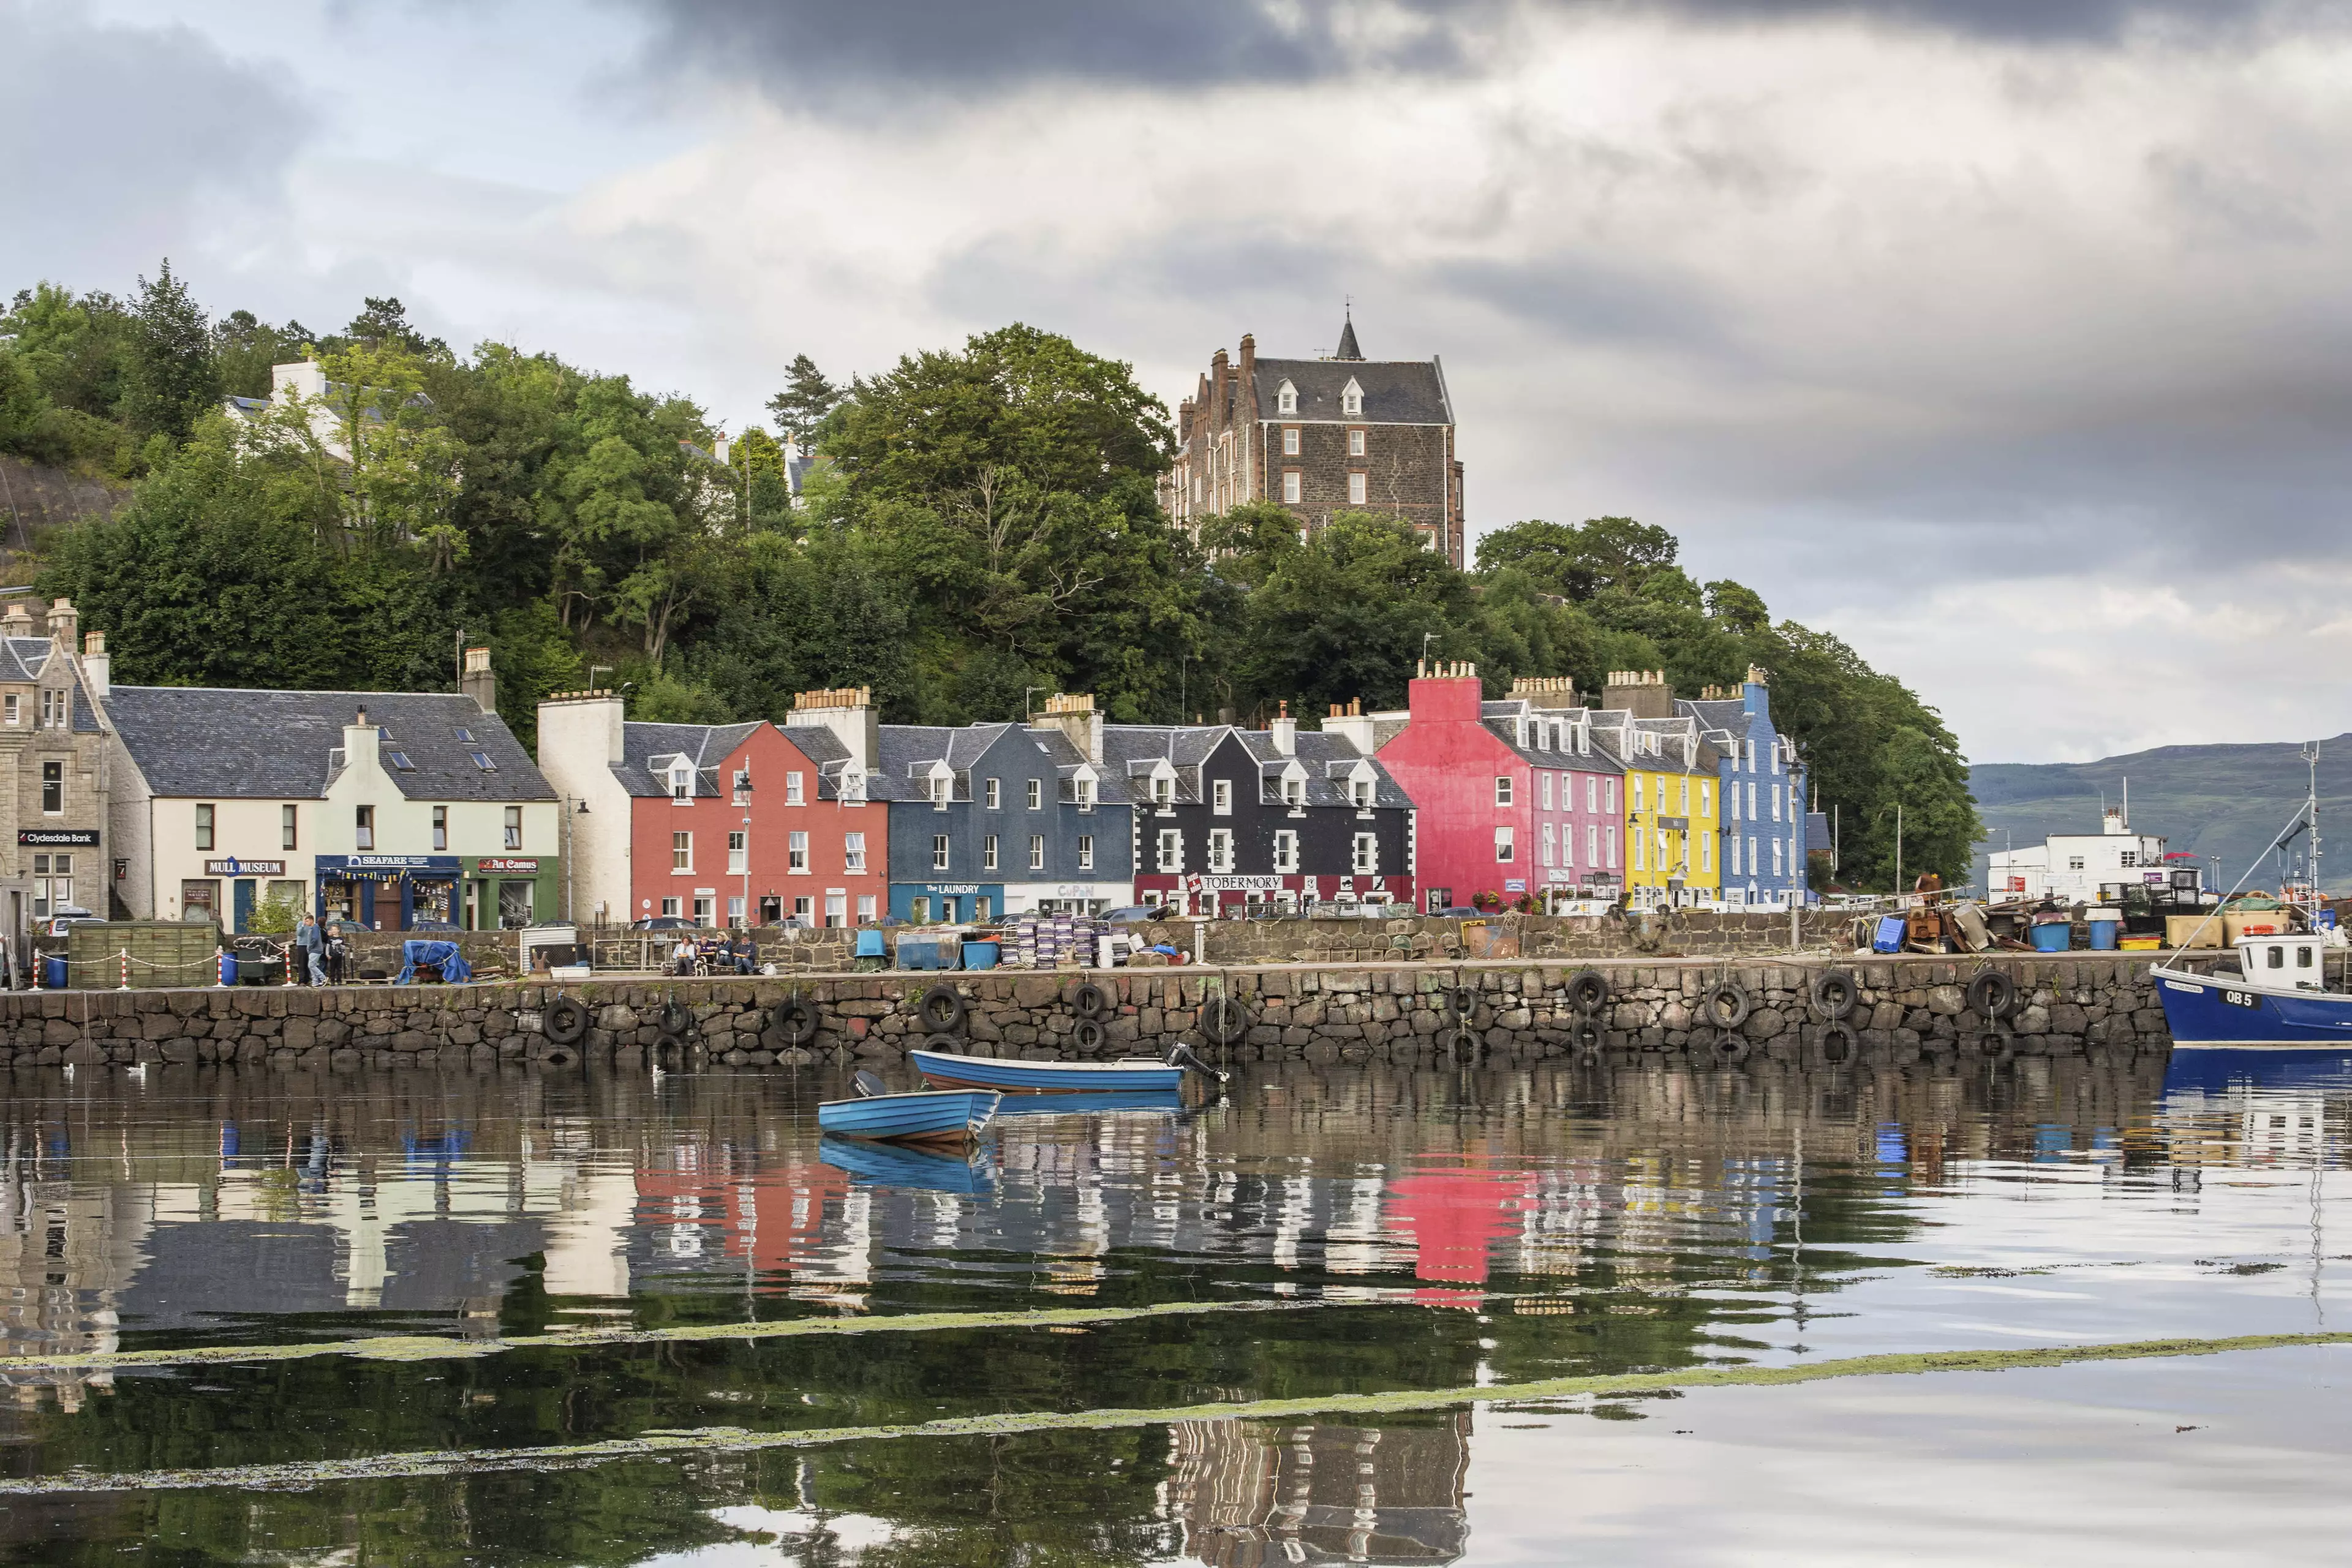 Tobermory on the Isle of Mull, where you can get a ferry from the Airbnb (